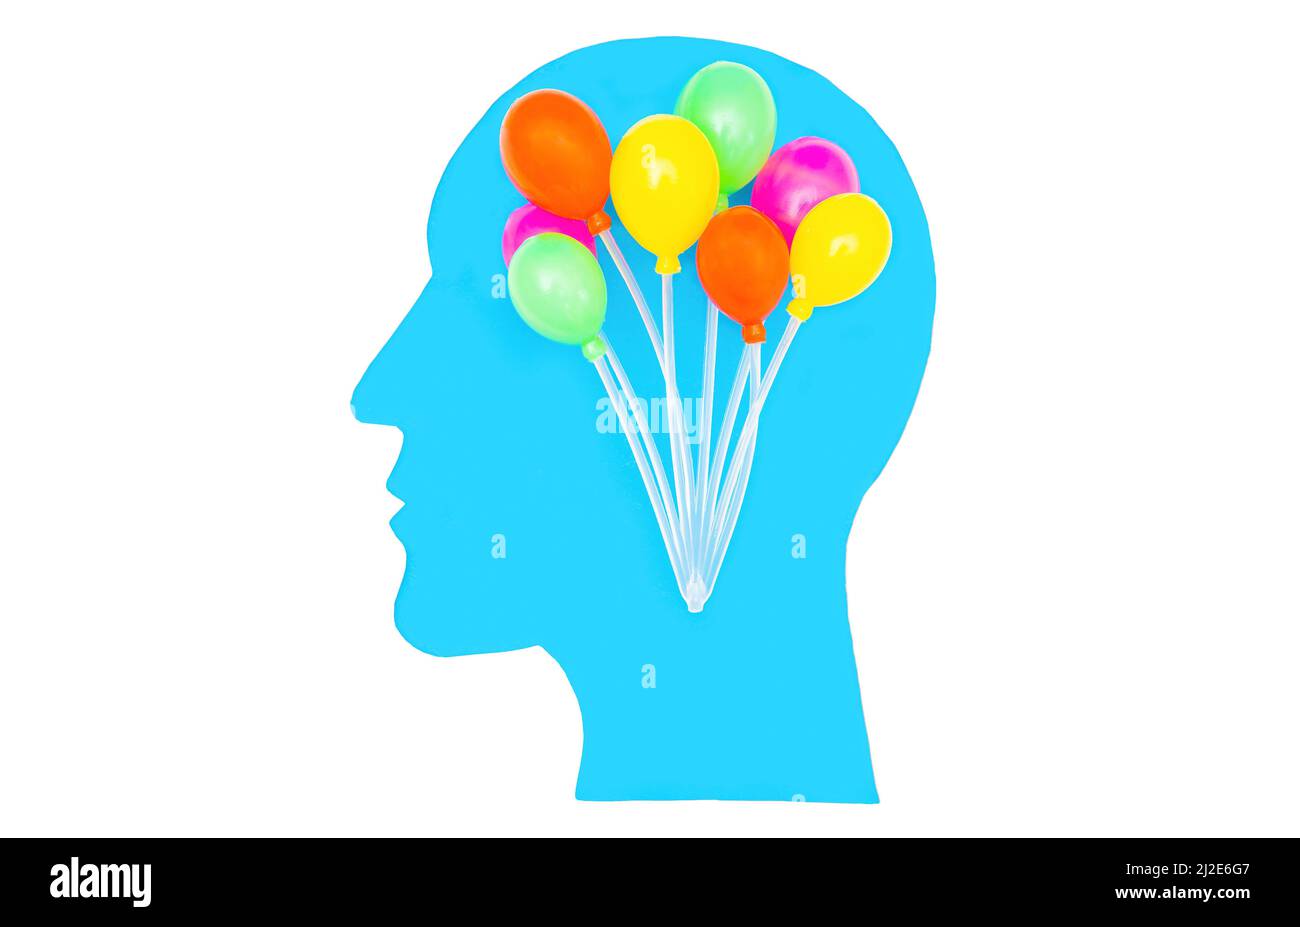 Light blue man's head profile silhouette with a bunch of prop party balloons isolated on white. Birthday party ideas concept. Stock Photo